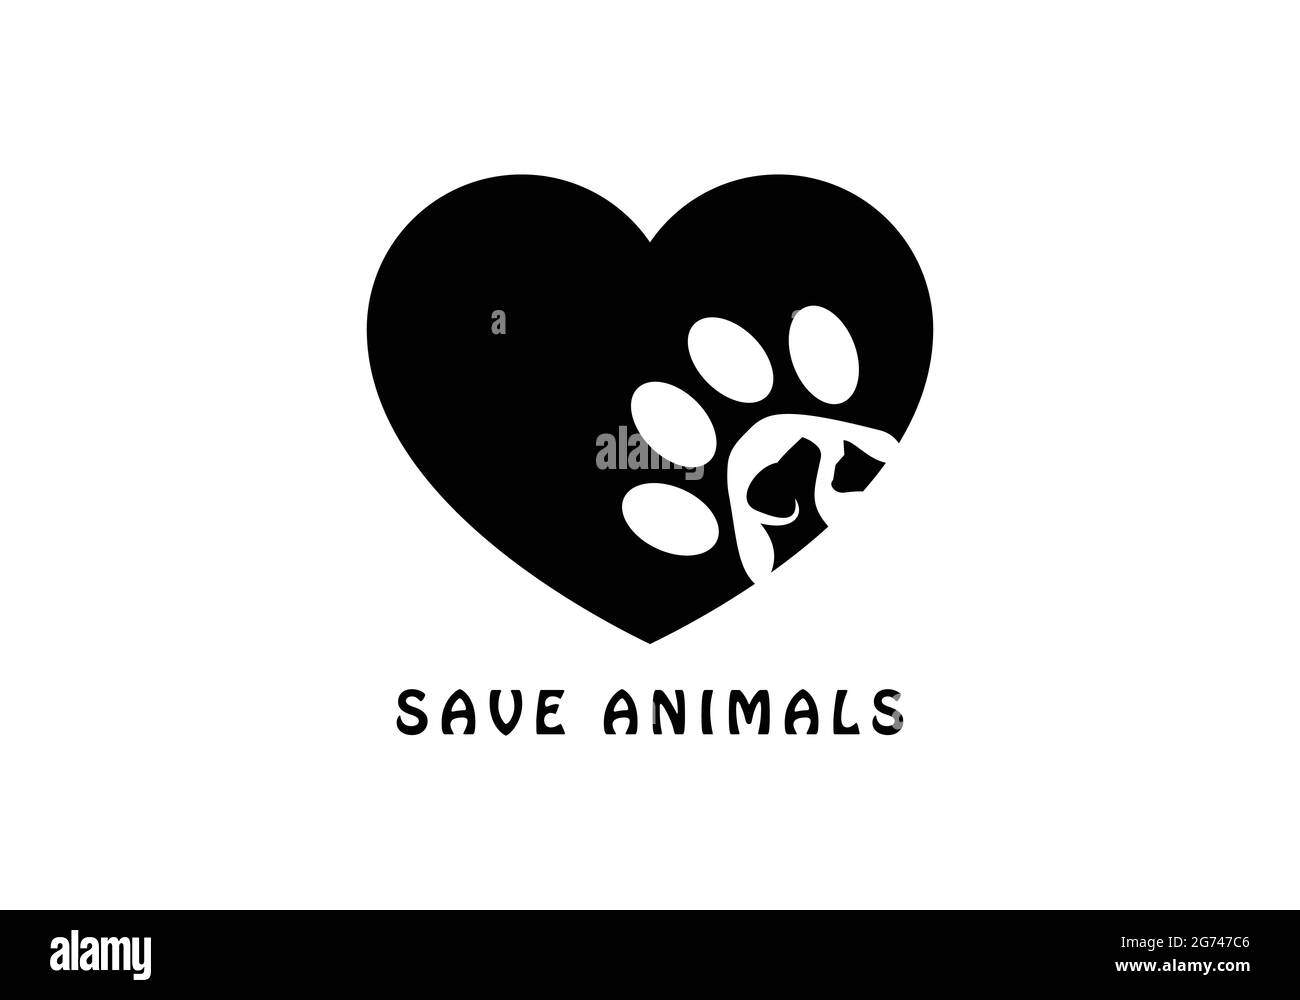 Save Animals Logo for Animal Health Care / Society / Dog and Cat Logo in Love or Heart Shape Dog and Cat face logo Animal Rescue Agency NGO Logo Stock Vector